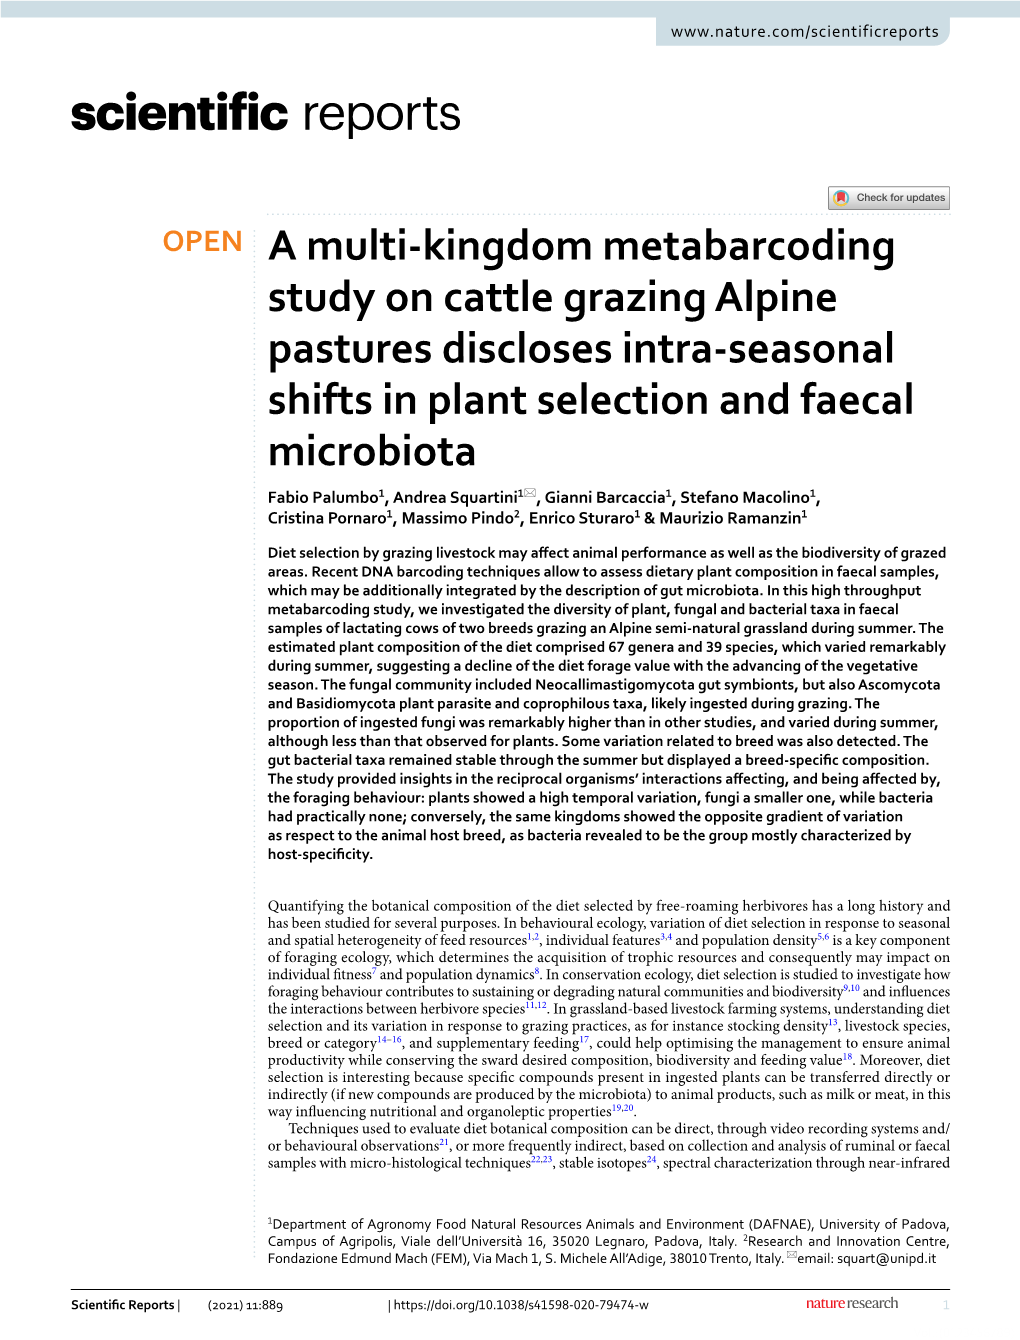 A Multi-Kingdom Metabarcoding Study on Cattle Grazing Alpine Pastures